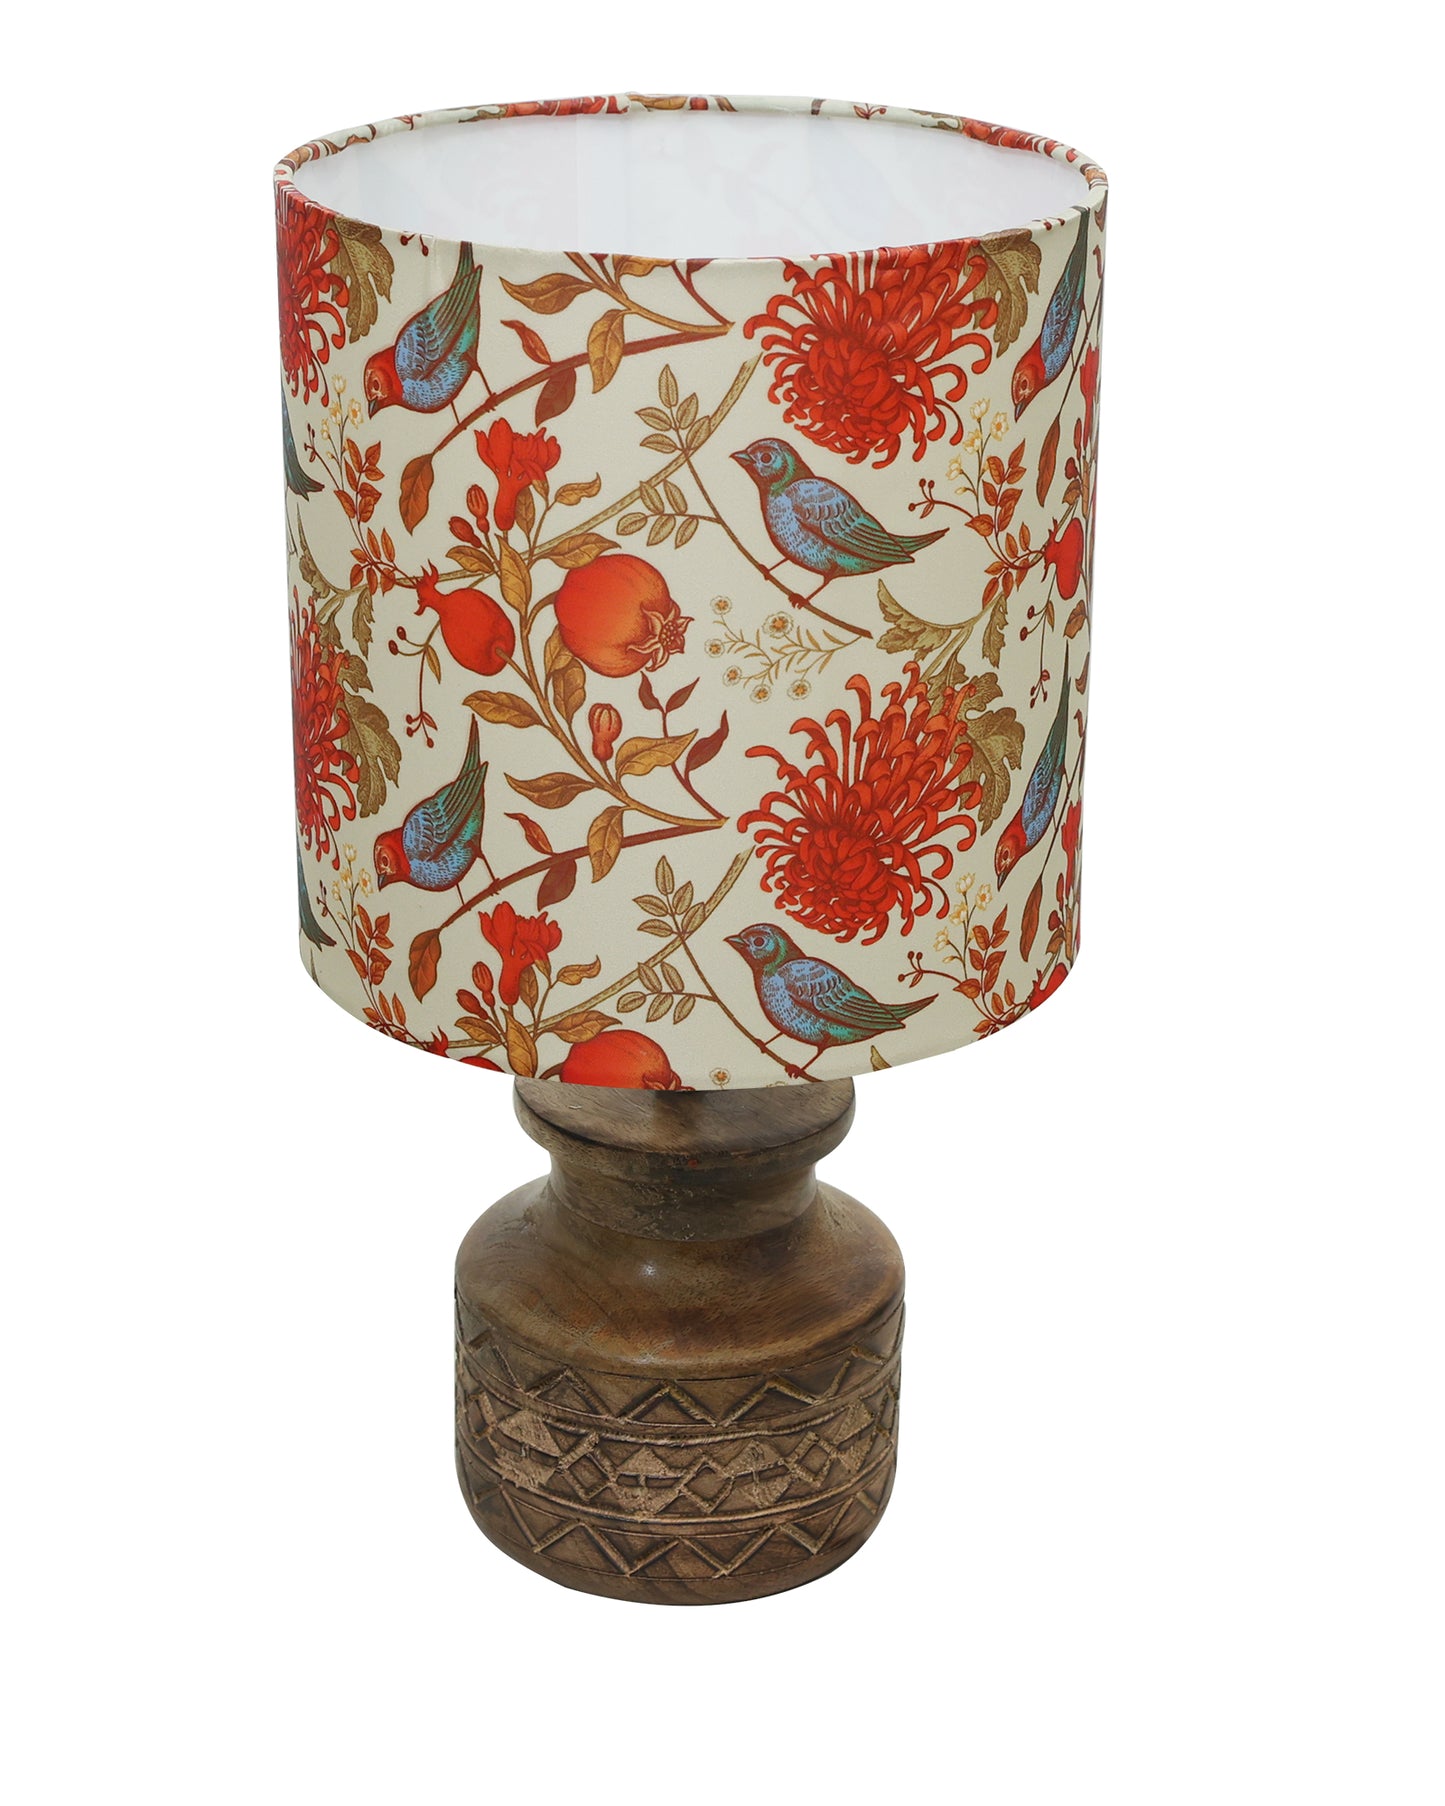 Wood Table Lamp, Modern Base Fabric Lampshade for Home Office Cafe Restaurant, Carved Pot